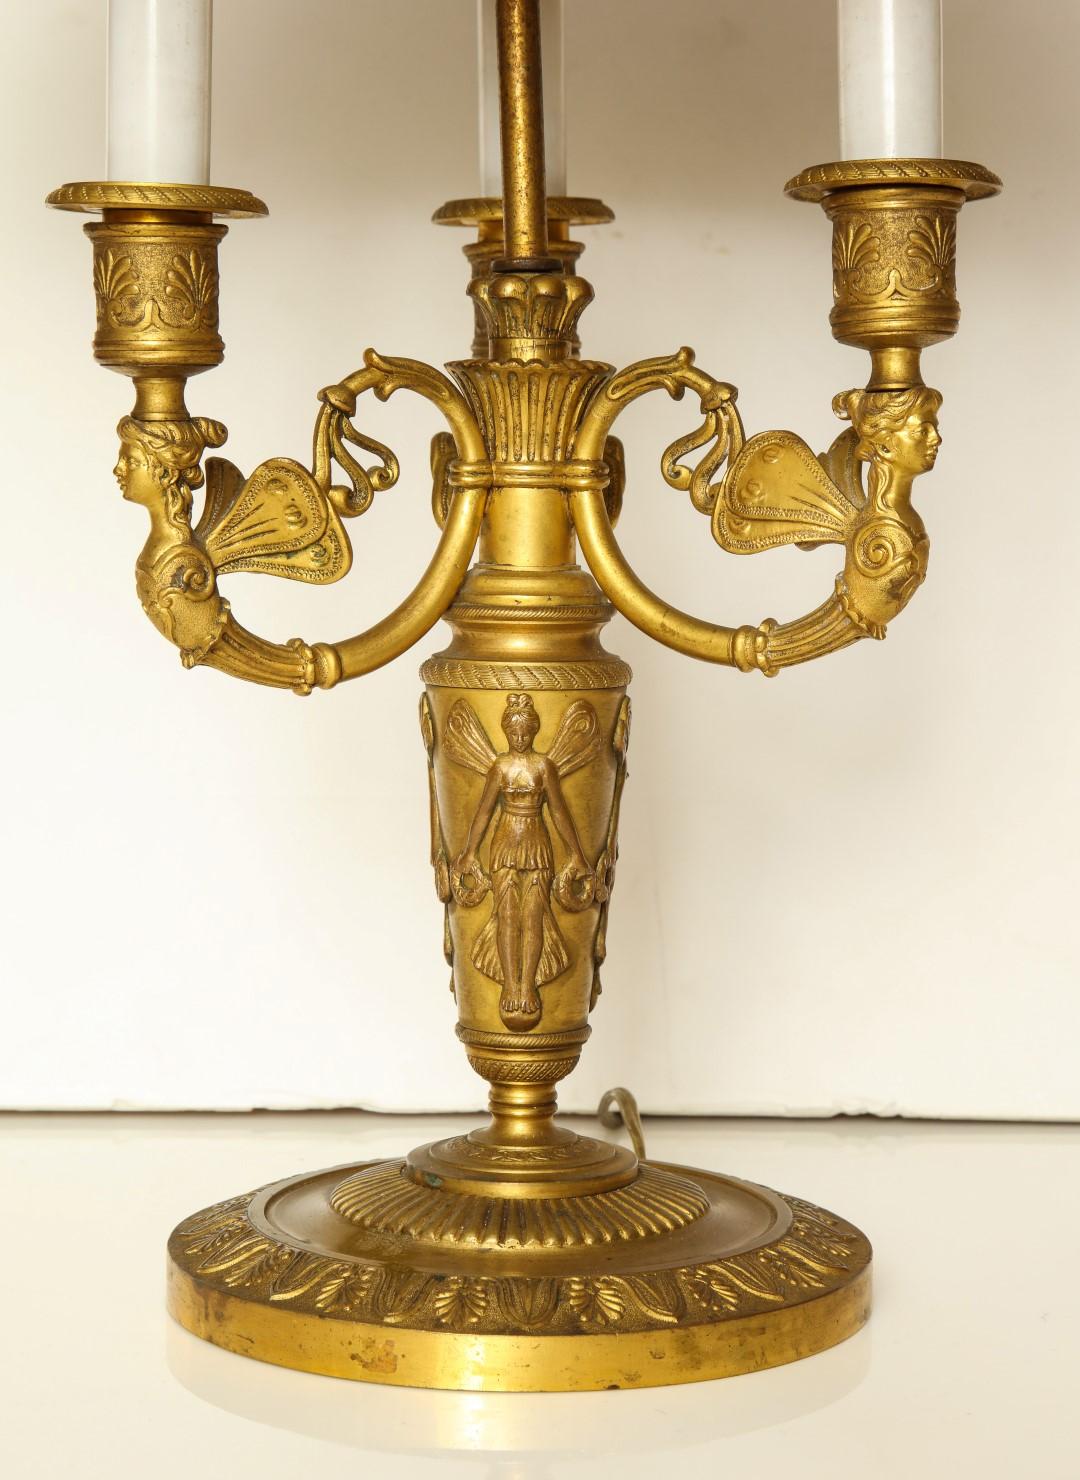 A French Empire bouilotte lamp, stylized finial and caryatid candle arms, first half of the 19th century.